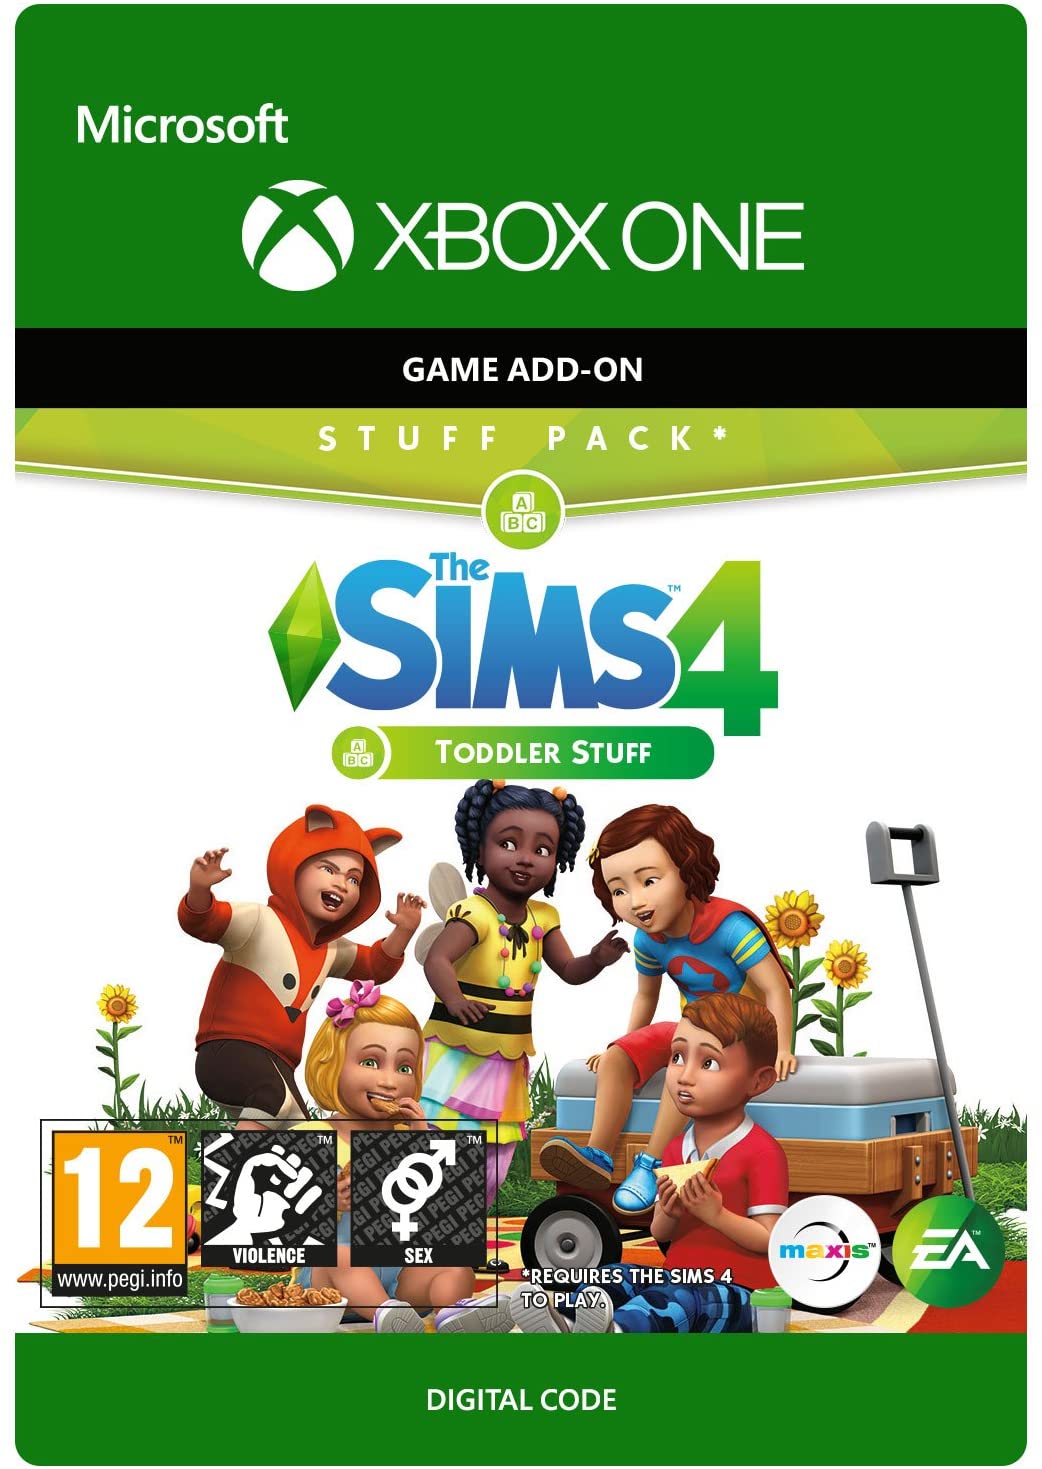 The Sims 4: Toddler Stuff VPN ACTIVATED Key (Xbox One) - 